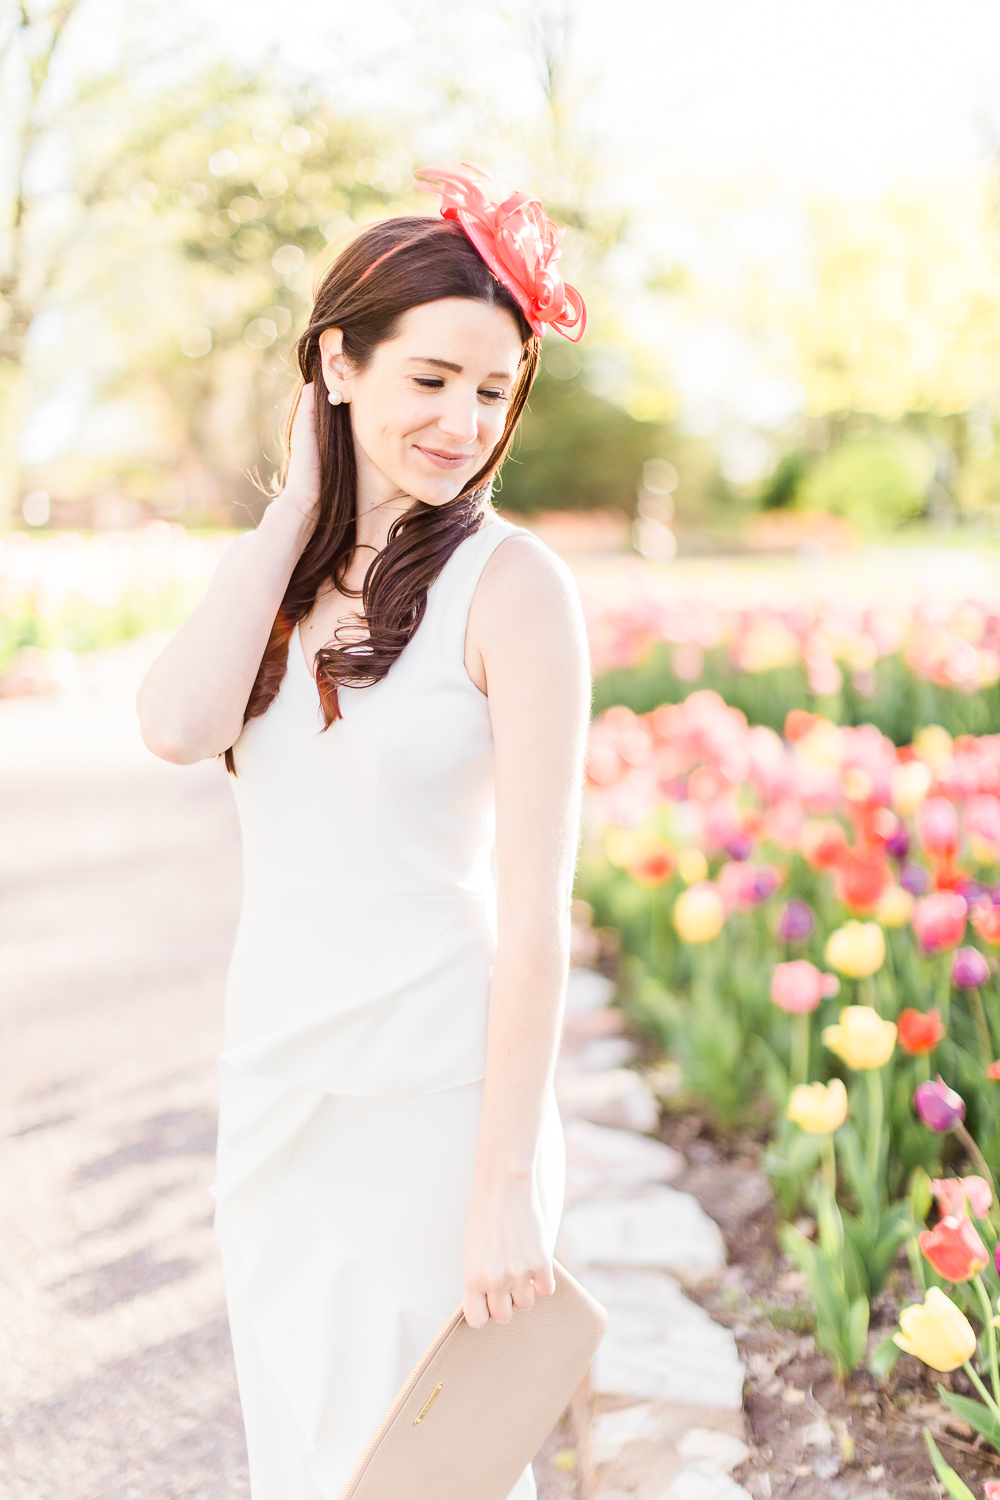 Maggie London Noreen Midi Dress styled with red fascinator headband, GiGi New York Uber Clutch, and red block heel sandals, Derby Day Style Guide: 3 Head-to-Toe Kentucky Derby Outfit Ideas by affordable fashion blogger Stephanie Ziajka from Diary of a Debutante